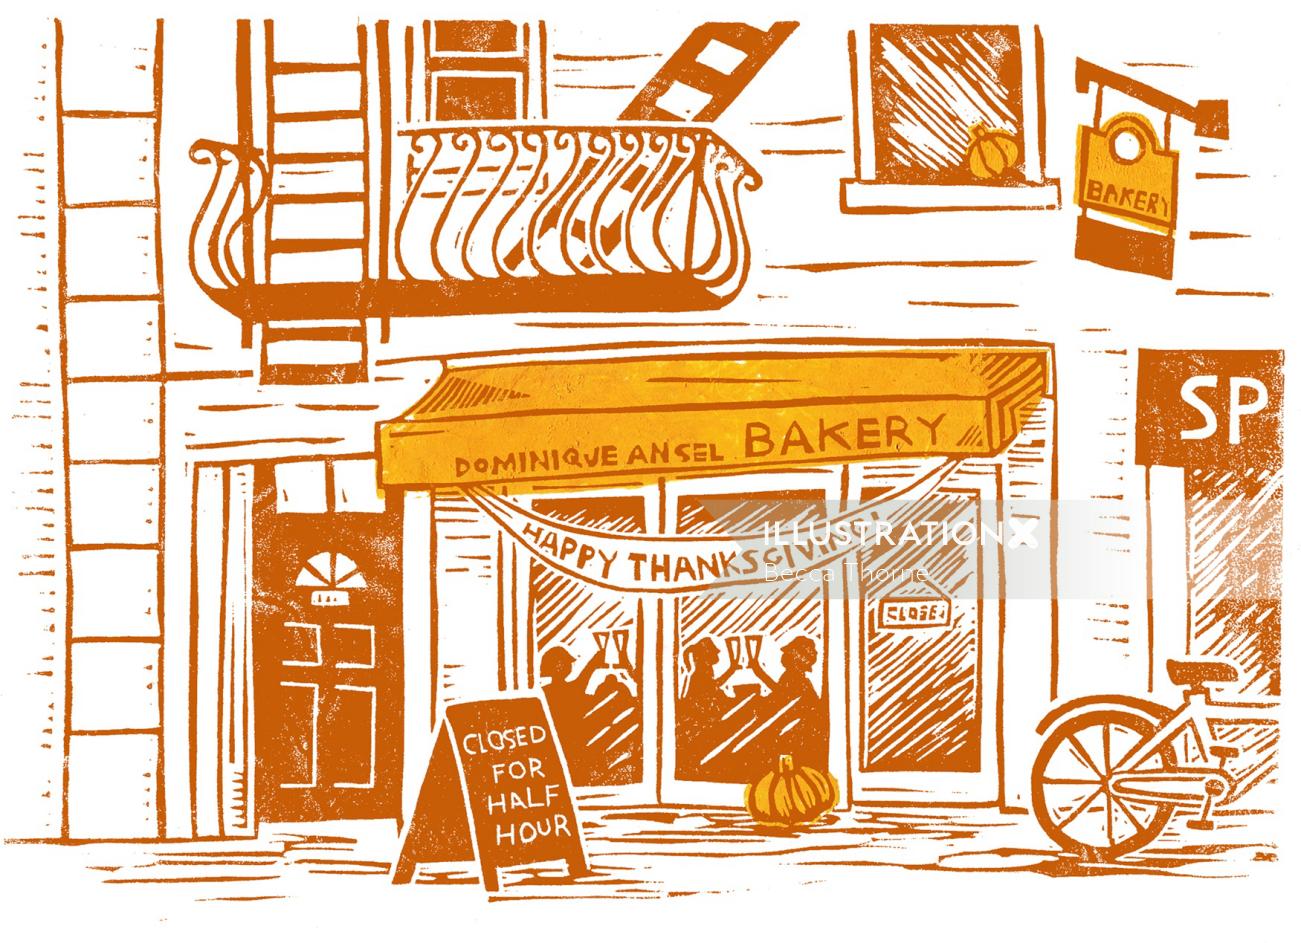 A sepia toned two-layer linocut illustration of Dominique Ansel's Bakery In New York City at Thanksg